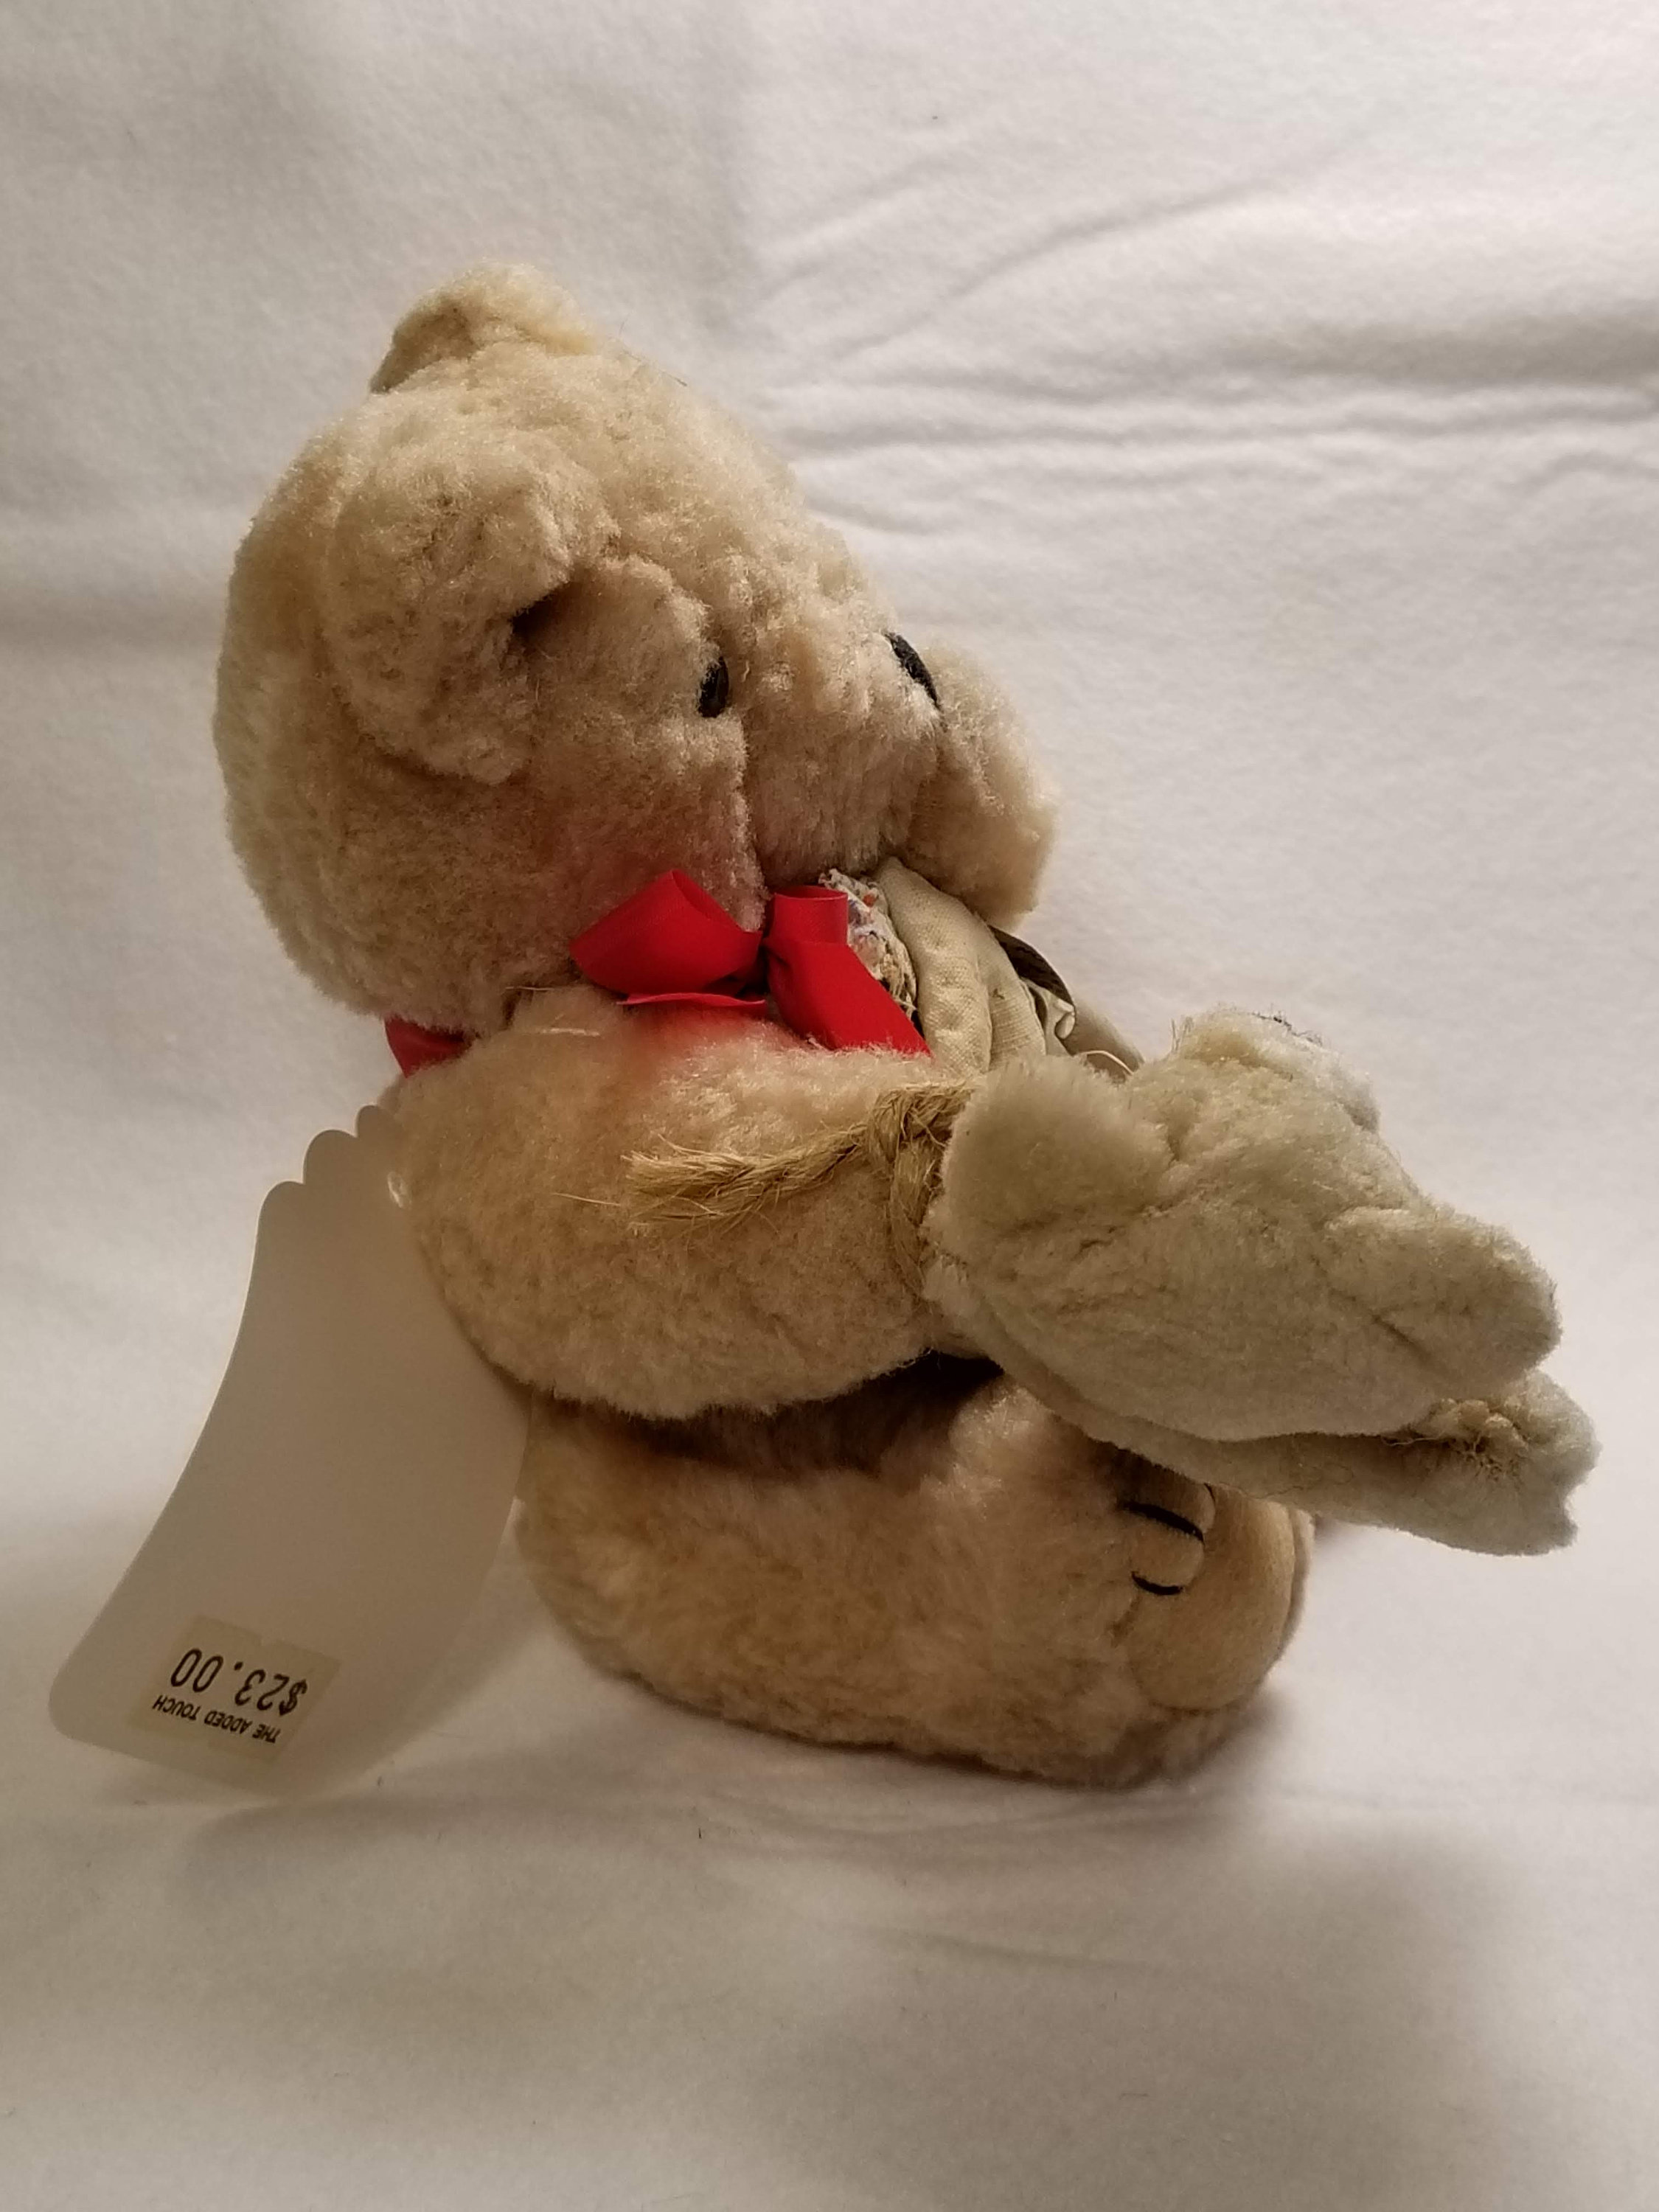 Teddy Bear michael and Friend Need a New Home by - Etsy